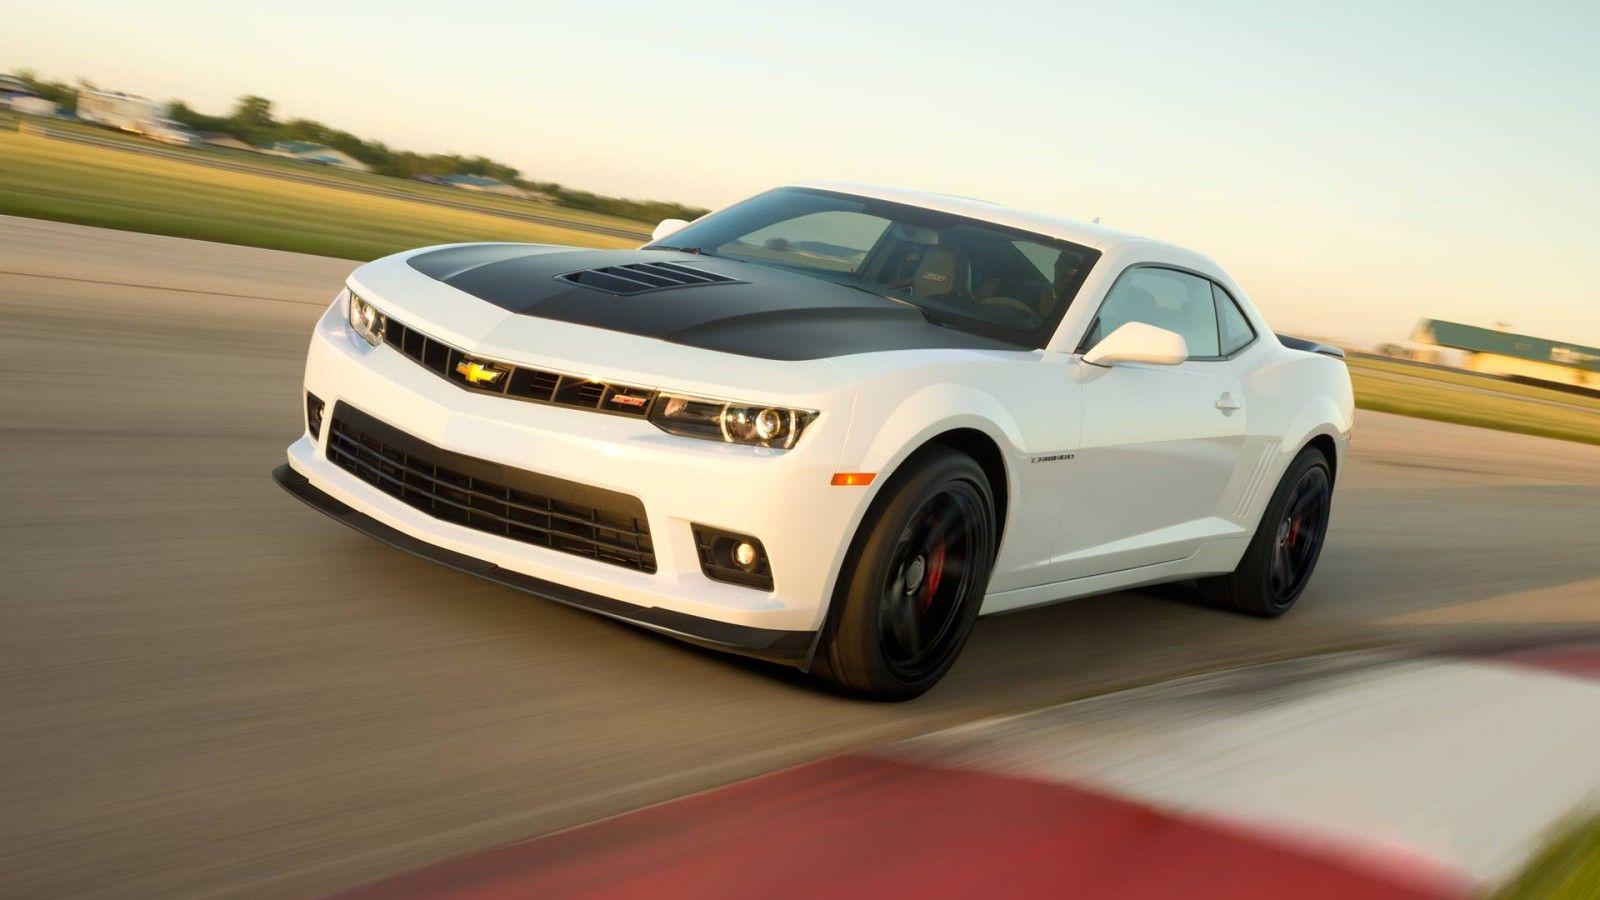 Discover the 2014 Chevy Camaro SS at Cox Chevrolet